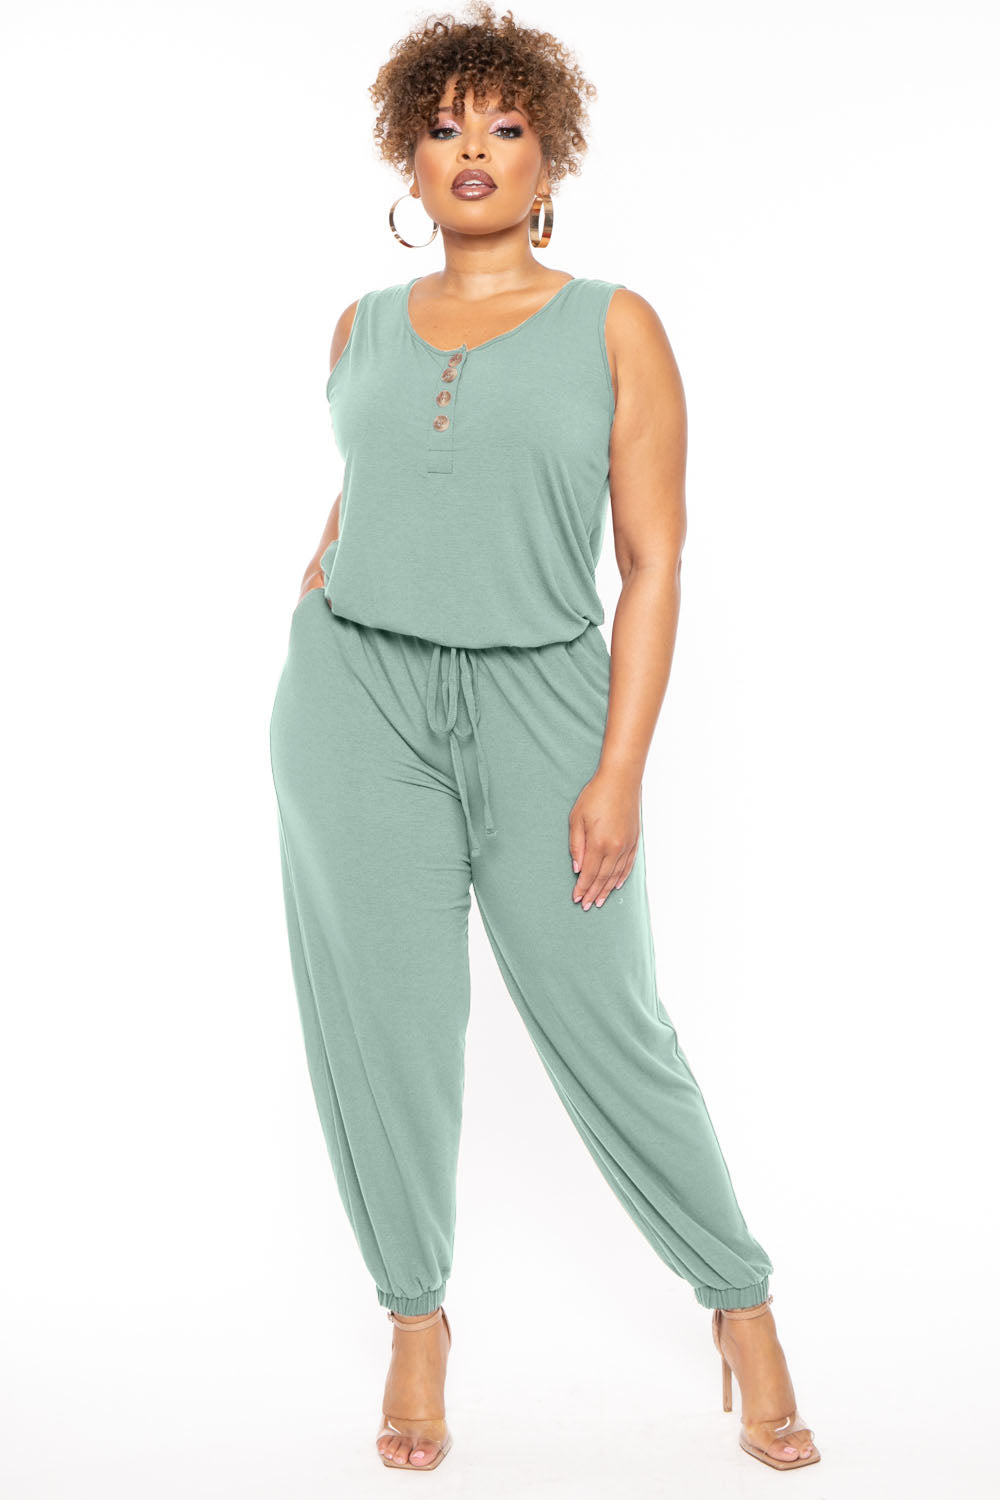 Zenana Jumpsuits and Rompers Plus Size Zelda Button Up Lounge Jumpsuit - Green